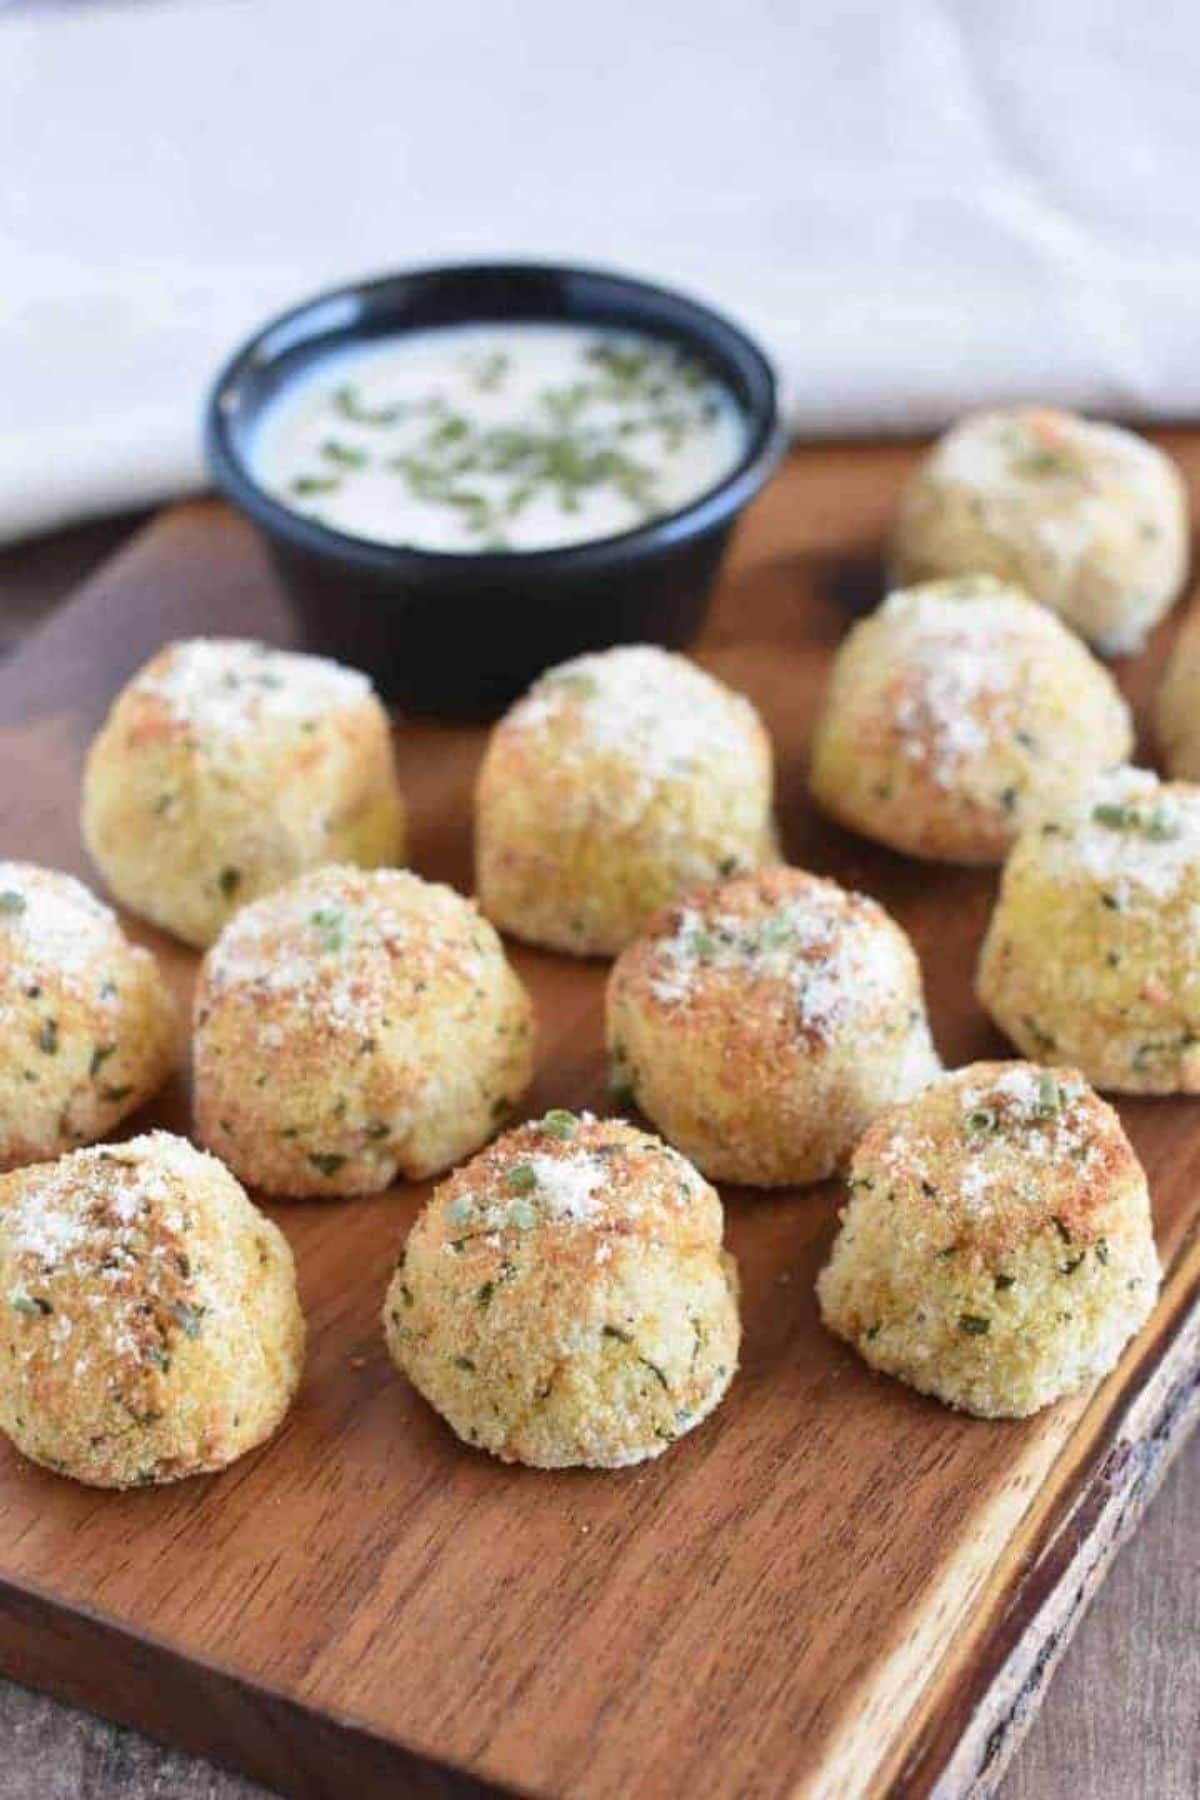 mashed potato balls sit on a wooden board next to a bowl of white dip scattered with herbs